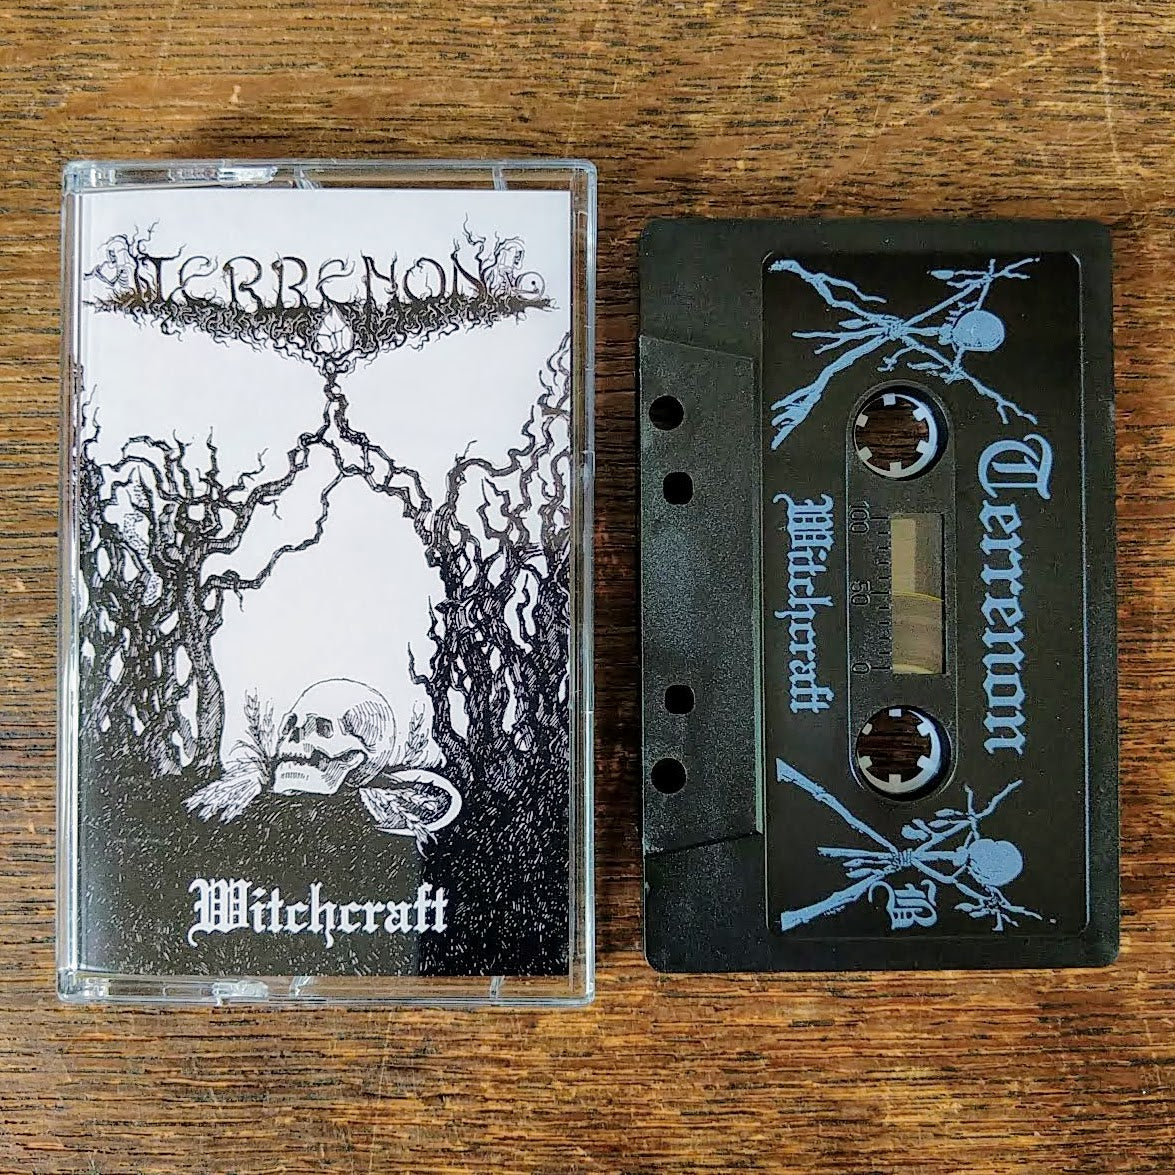 [SOLD OUT] TERRENON "Witchcraft" Cassette Tape